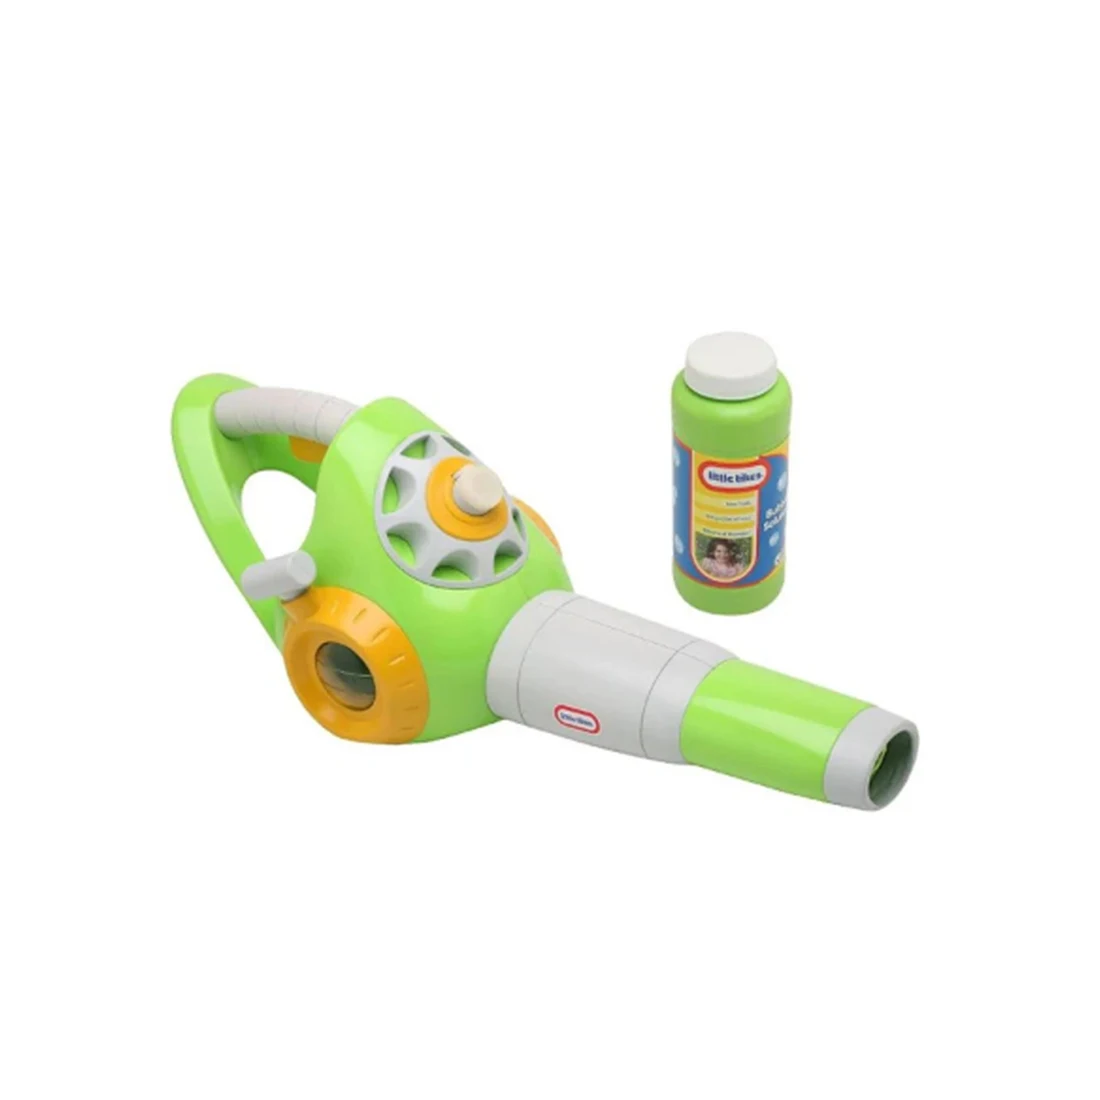 Imperial Toy Little Tikes Leaf & Lawn Bubble Blower Super Miracle Bubble Solution Included Easy For Kids To Load And Blow Bubble